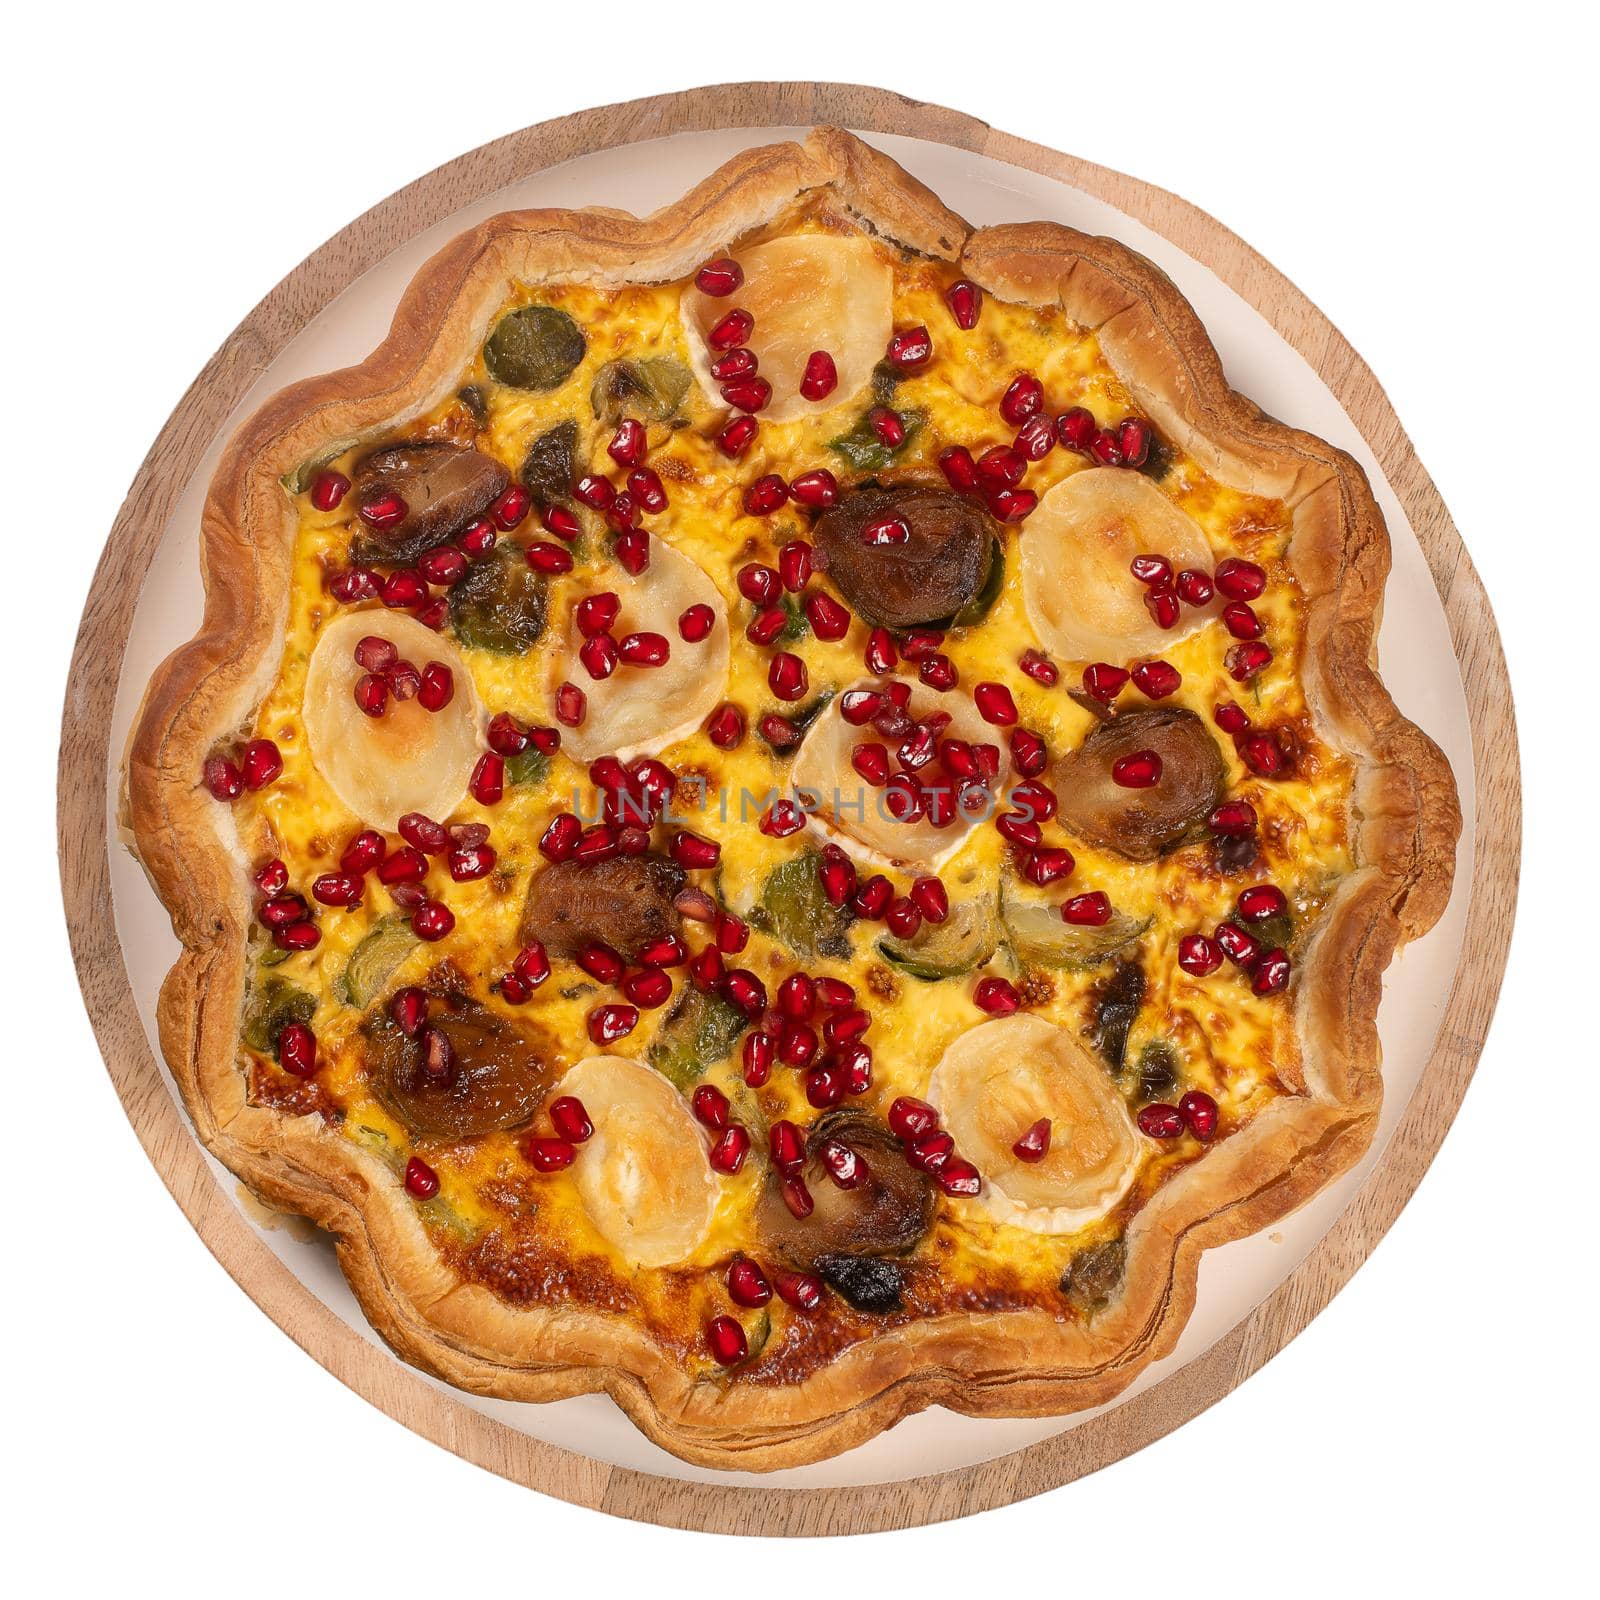 Top view of homemade vegetable quiche with goat cheese, brussels sprouts and pomegranate seeds isolated on white background.